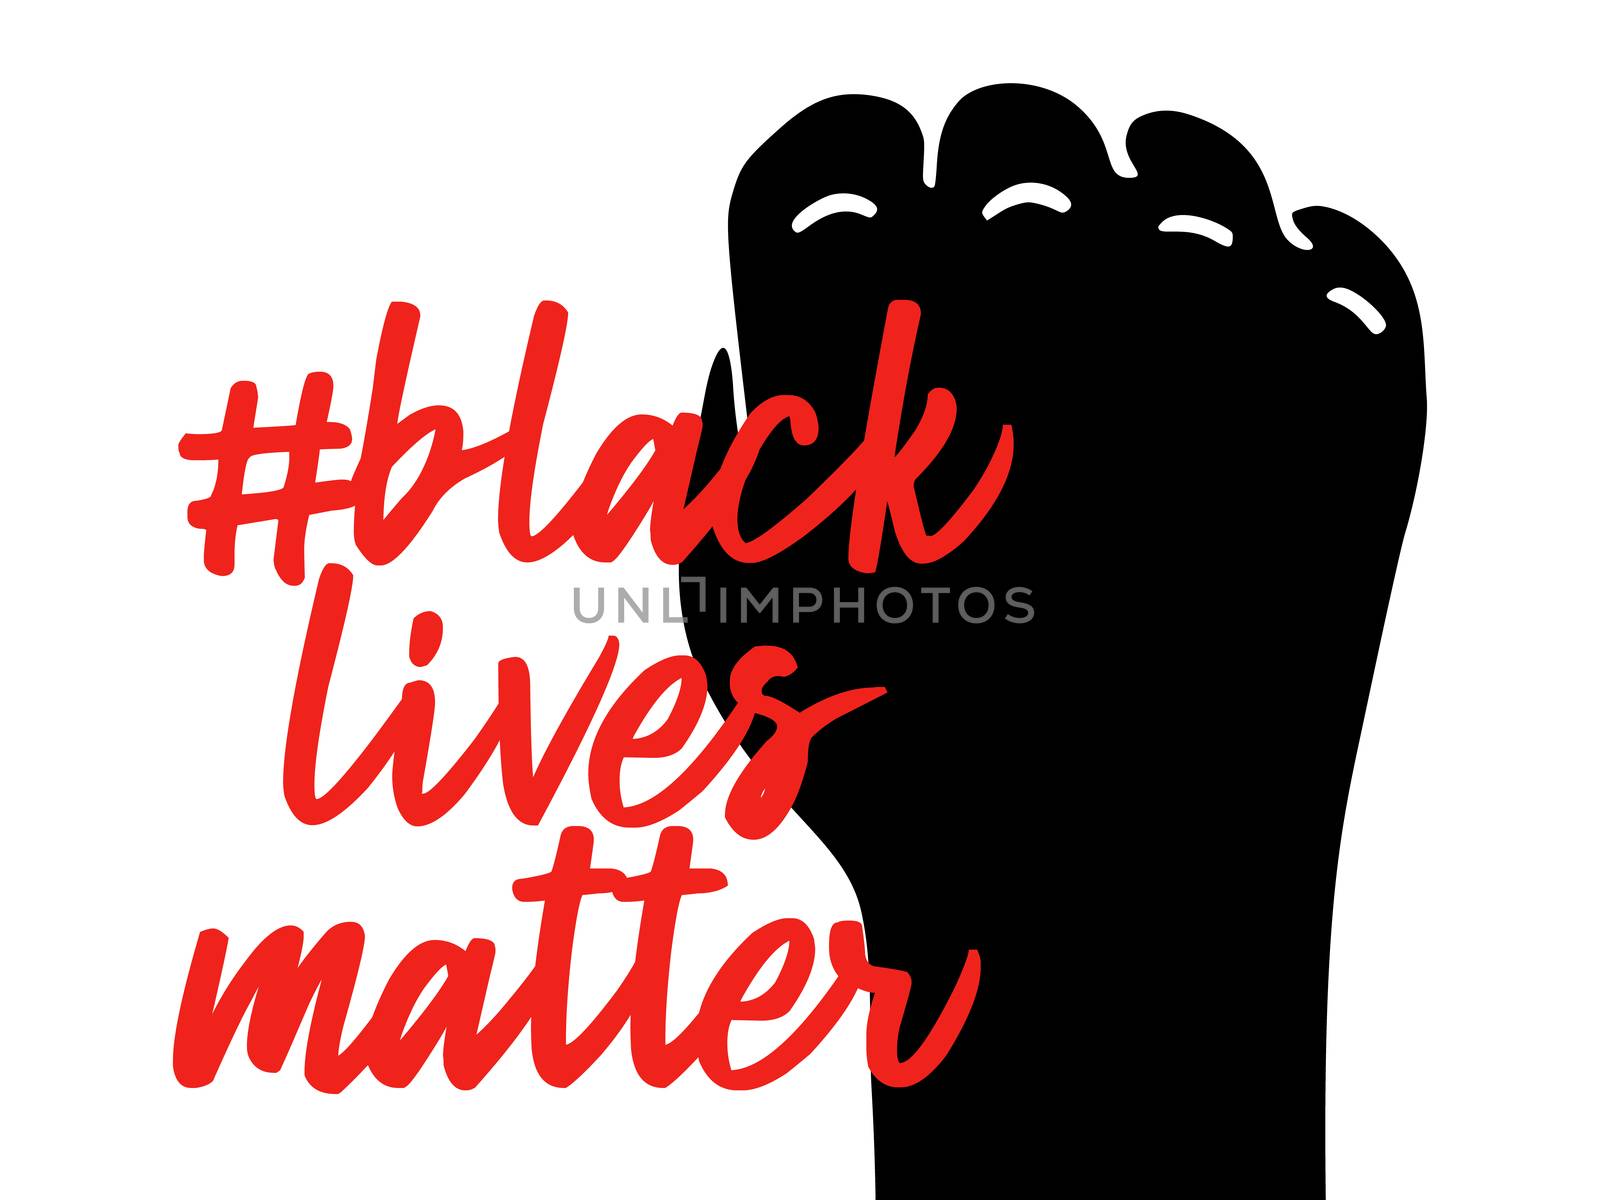 I can't breathe slogan Black lives matter. Black clenched protest fist with barbed wire and bullet holes. Illustration, vector by lunarts